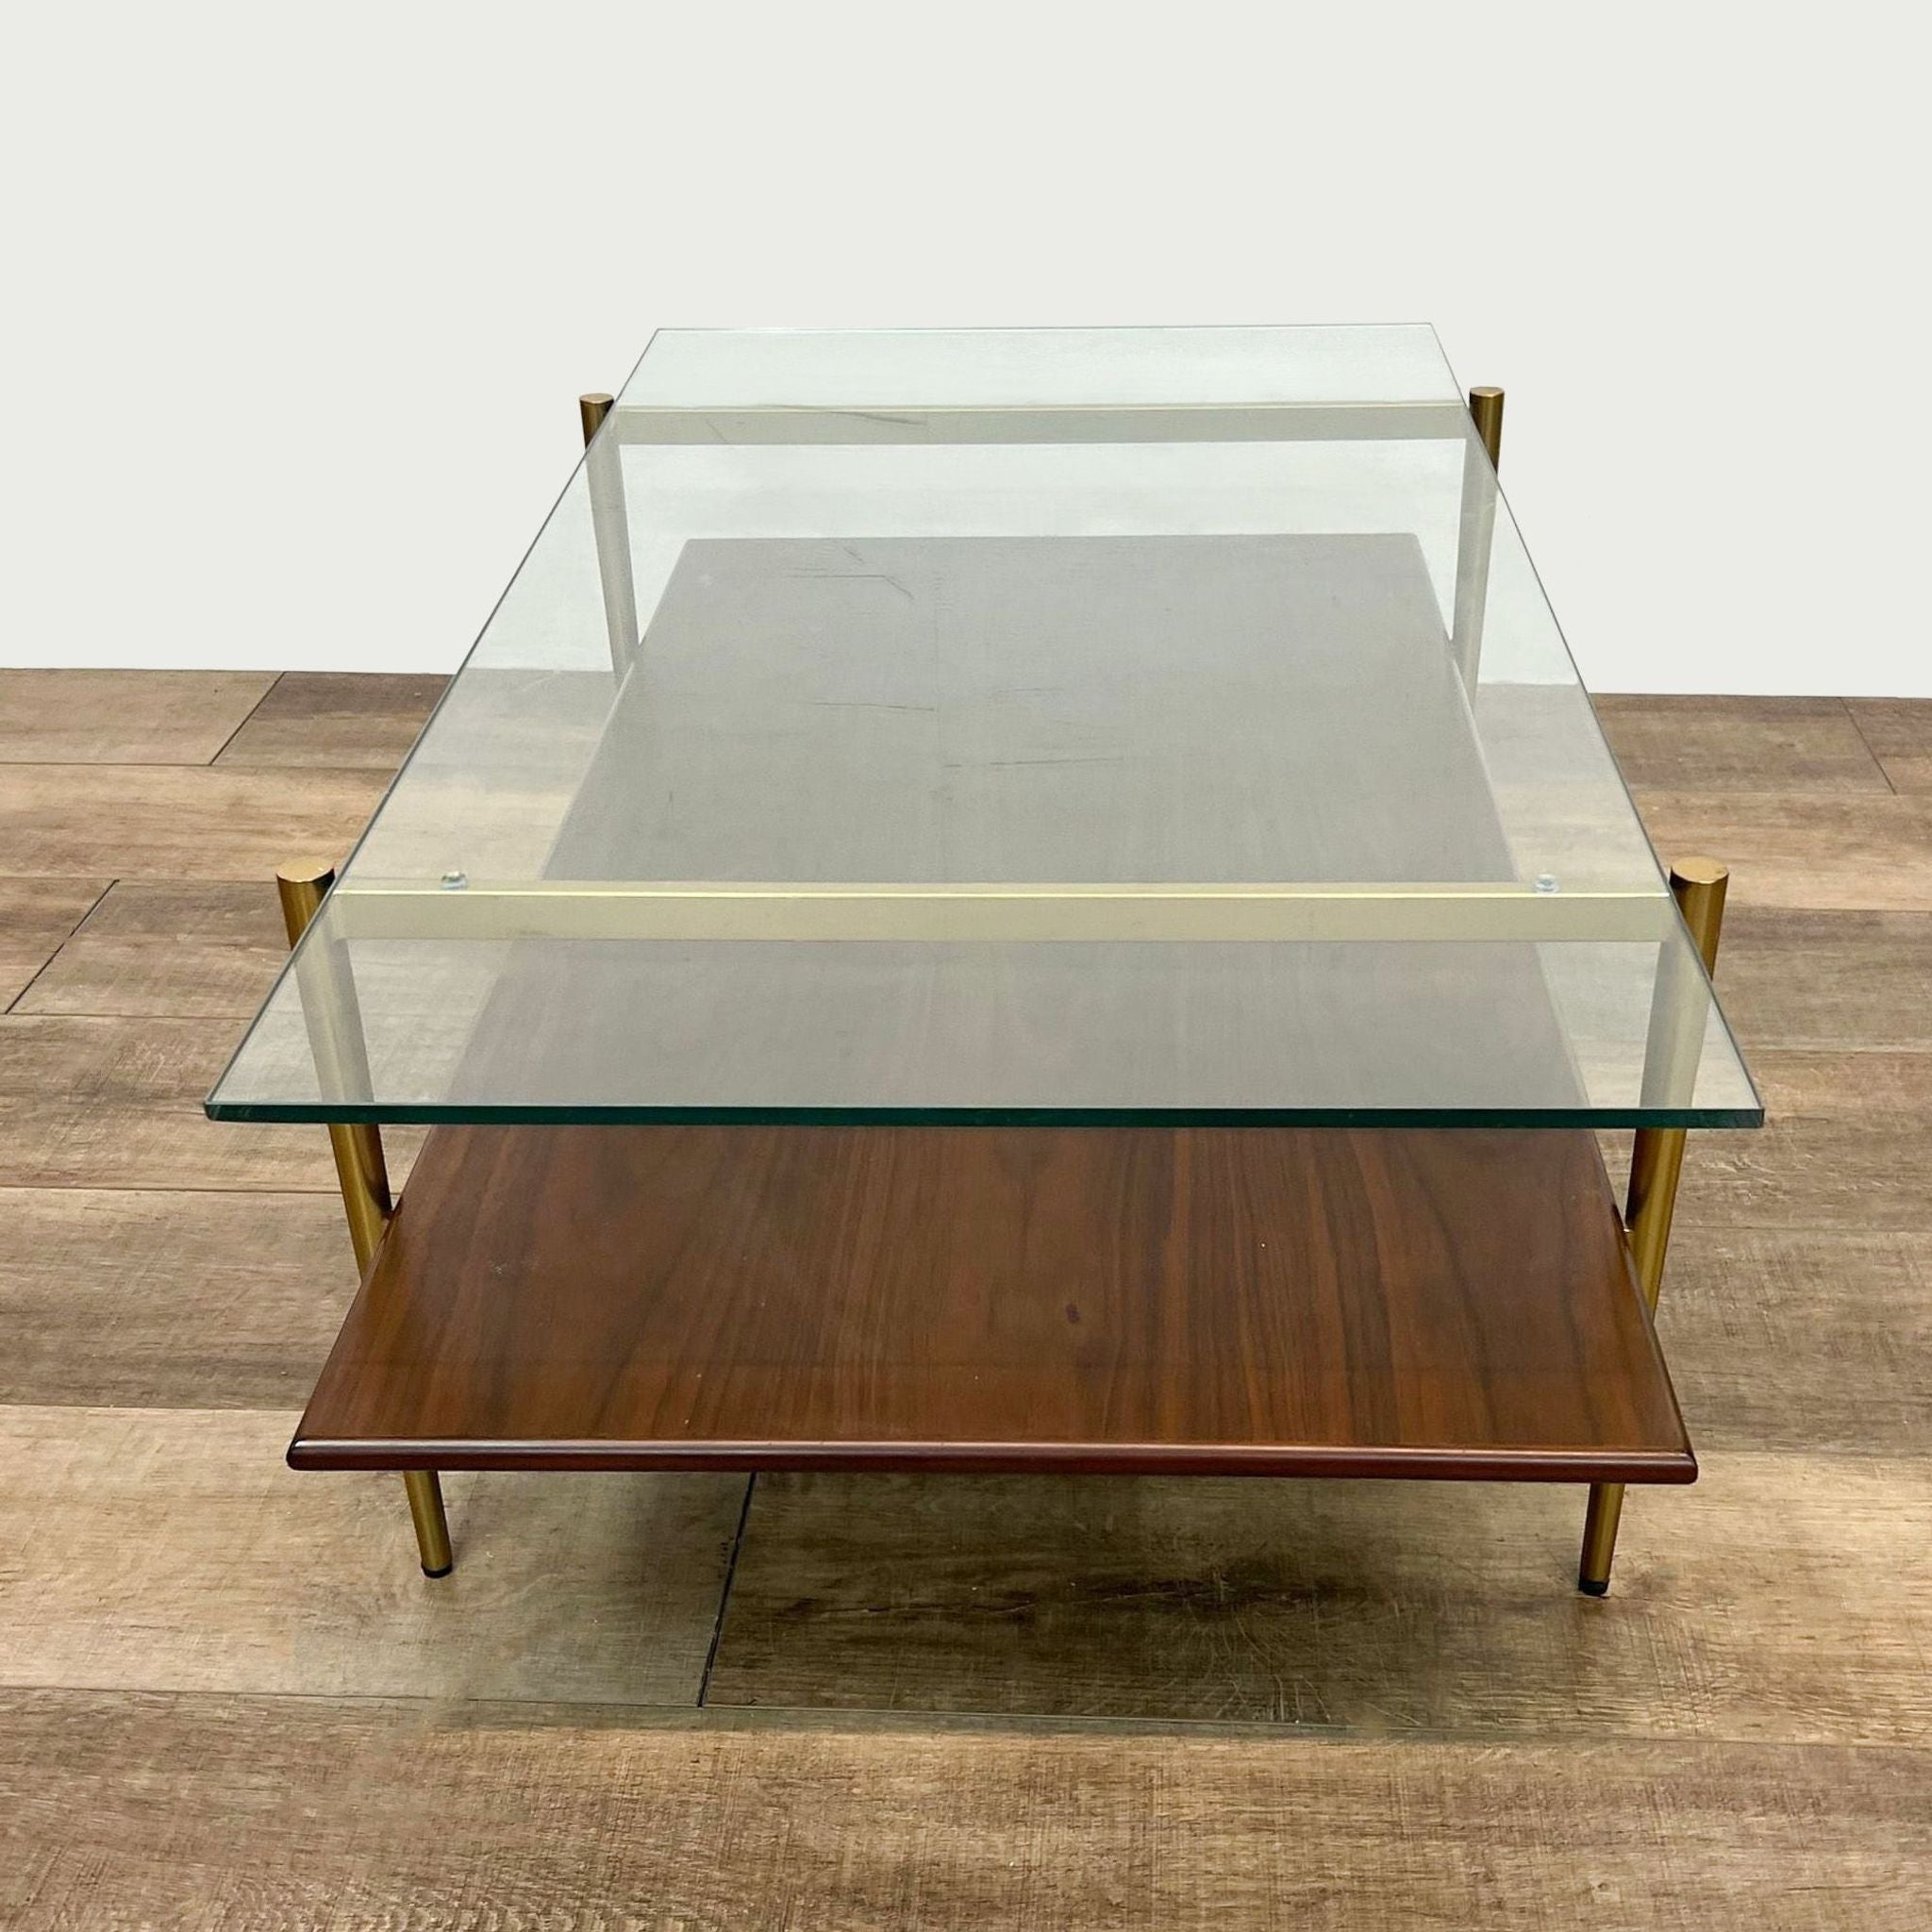 Wooden West Elm coffee table featuring a glass top layer over a lower wooden shelf with brass-finished detailing, on parquet flooring.